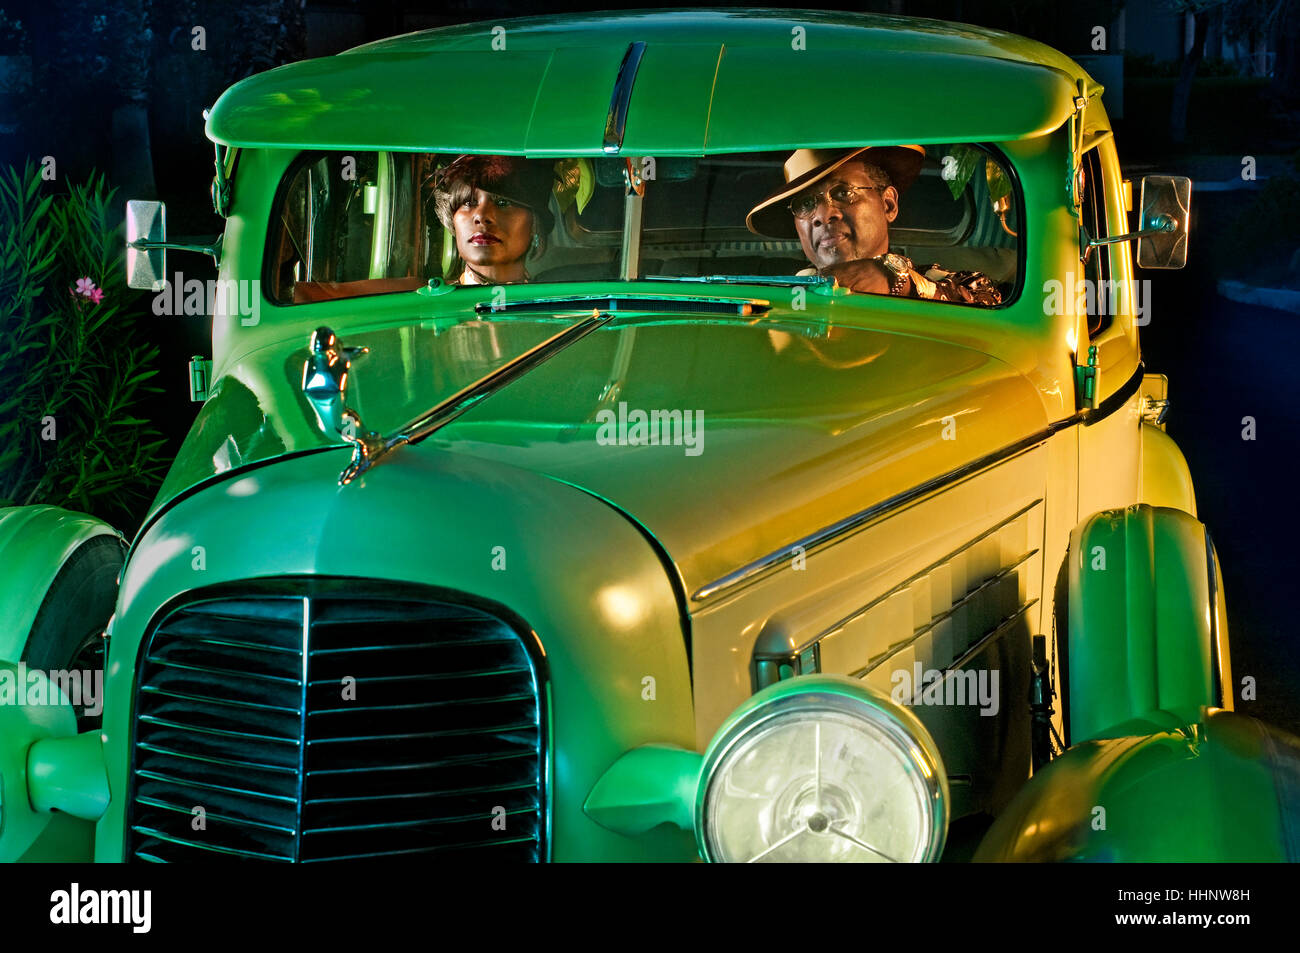 Couple in green vintage car Stock Photo